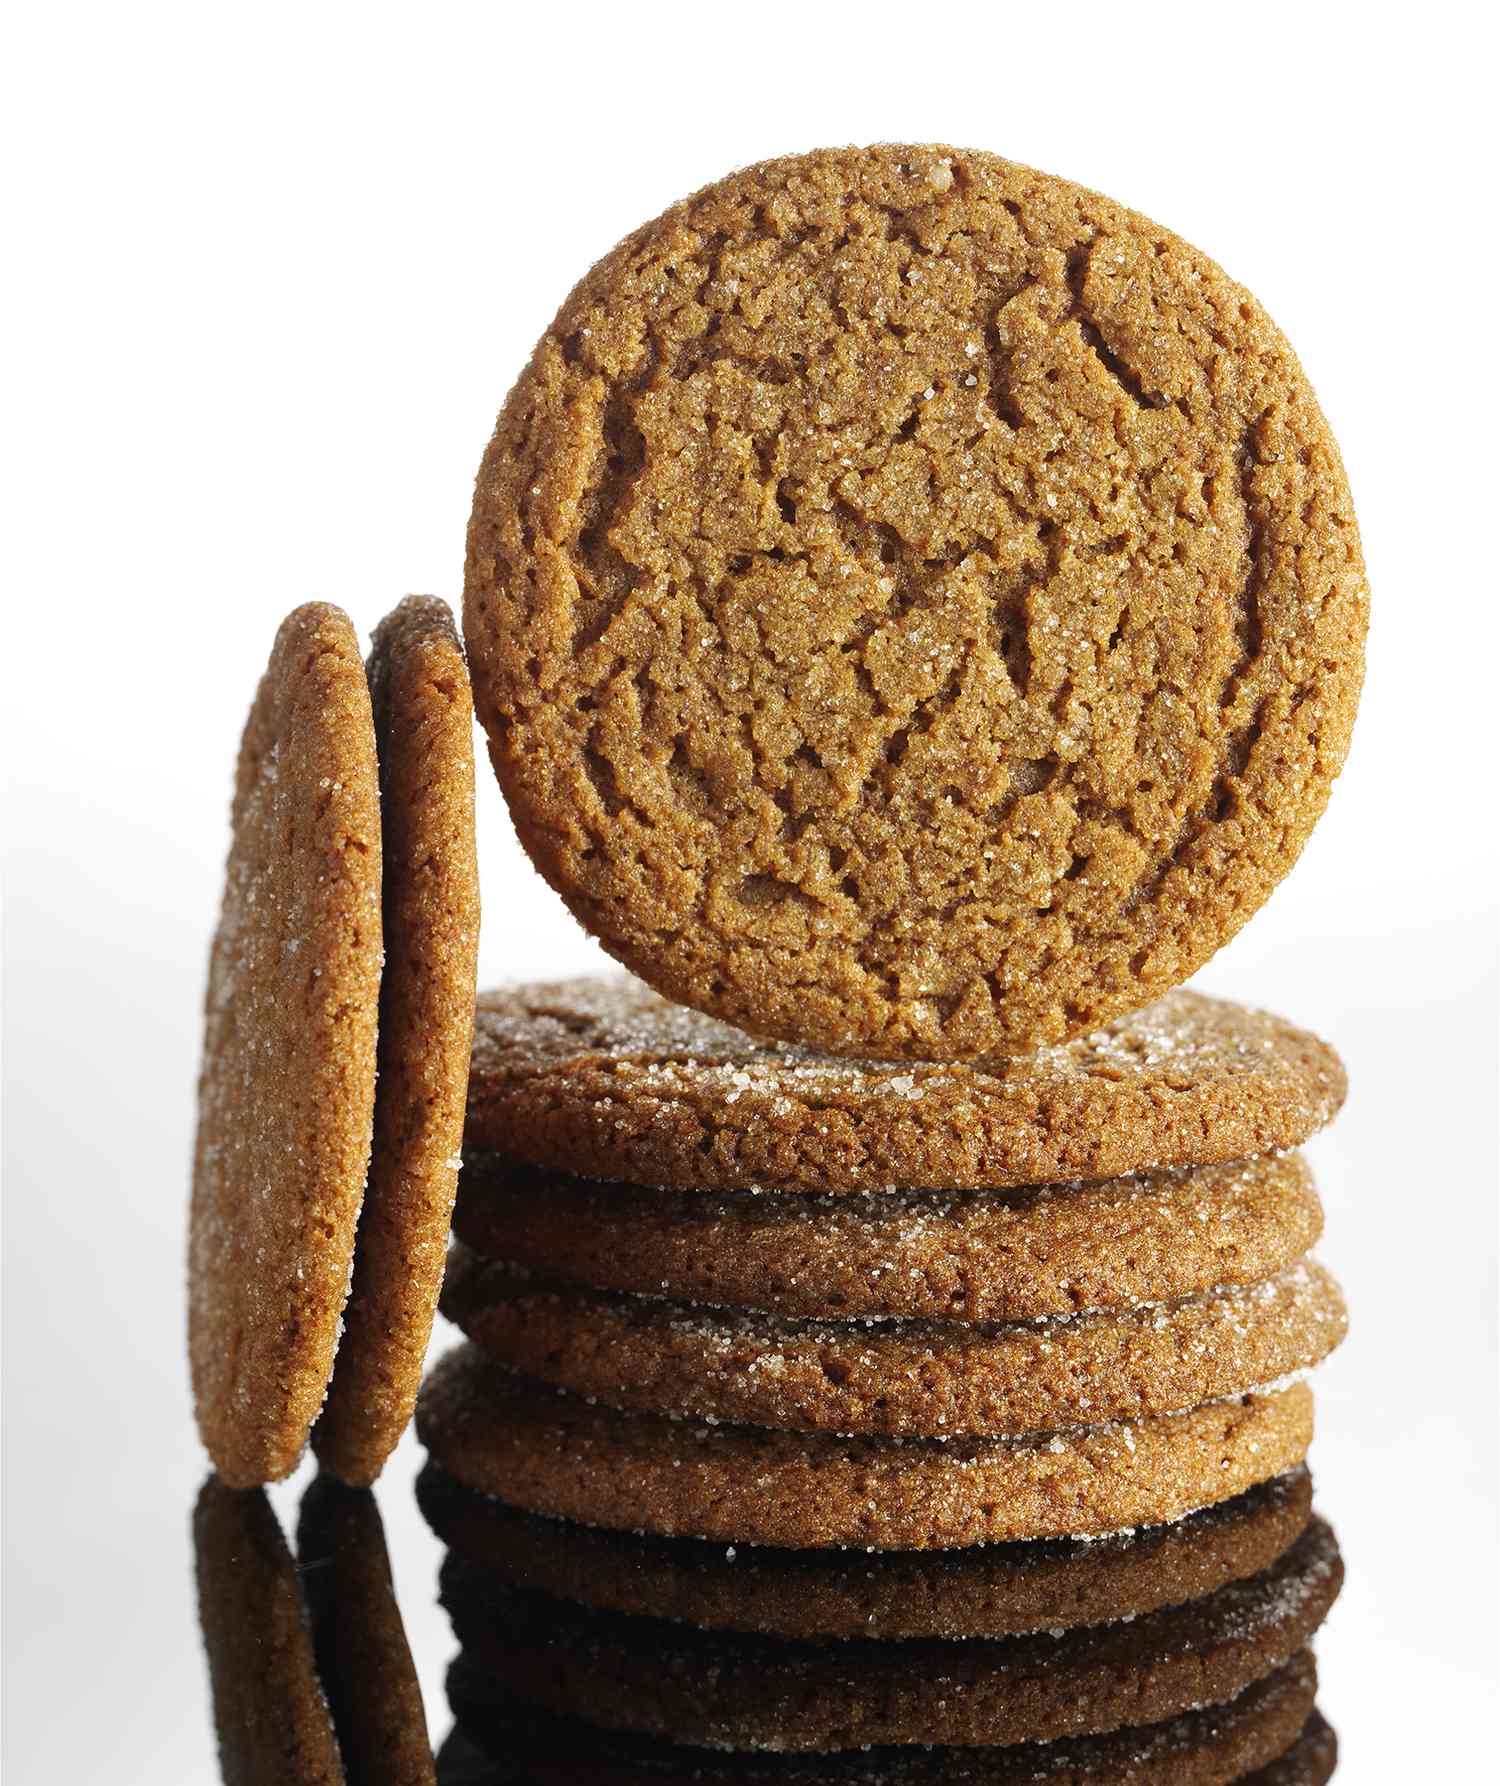 Chewy Spice Cookies